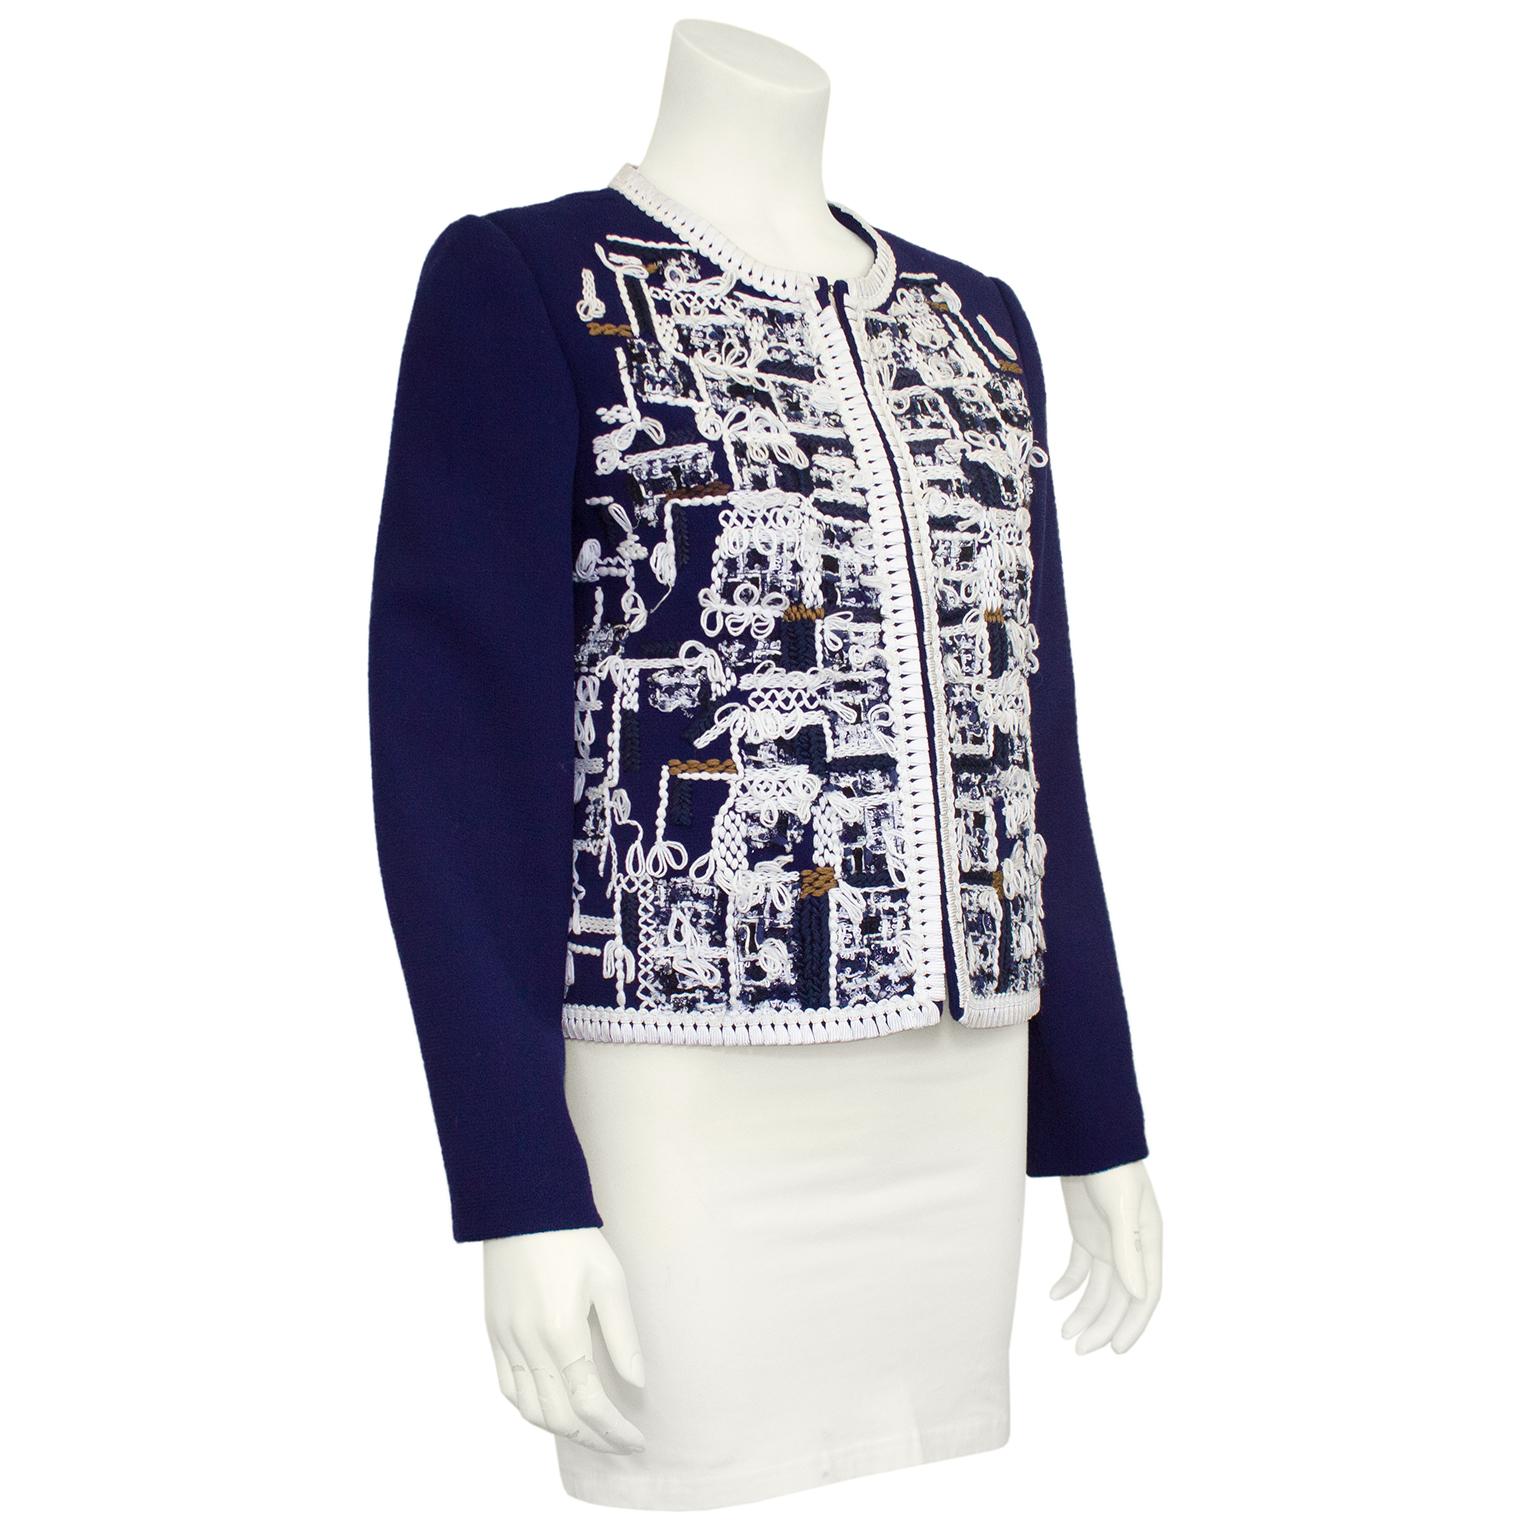 Oscar De La Renta Navy jacket from the 2011 pre fall collection. The irregular loopy embroidery covers the front and back sides of the bomber style jacket in white thread with touches of navy, blue and brown. Whipstitched along the crew neckline,